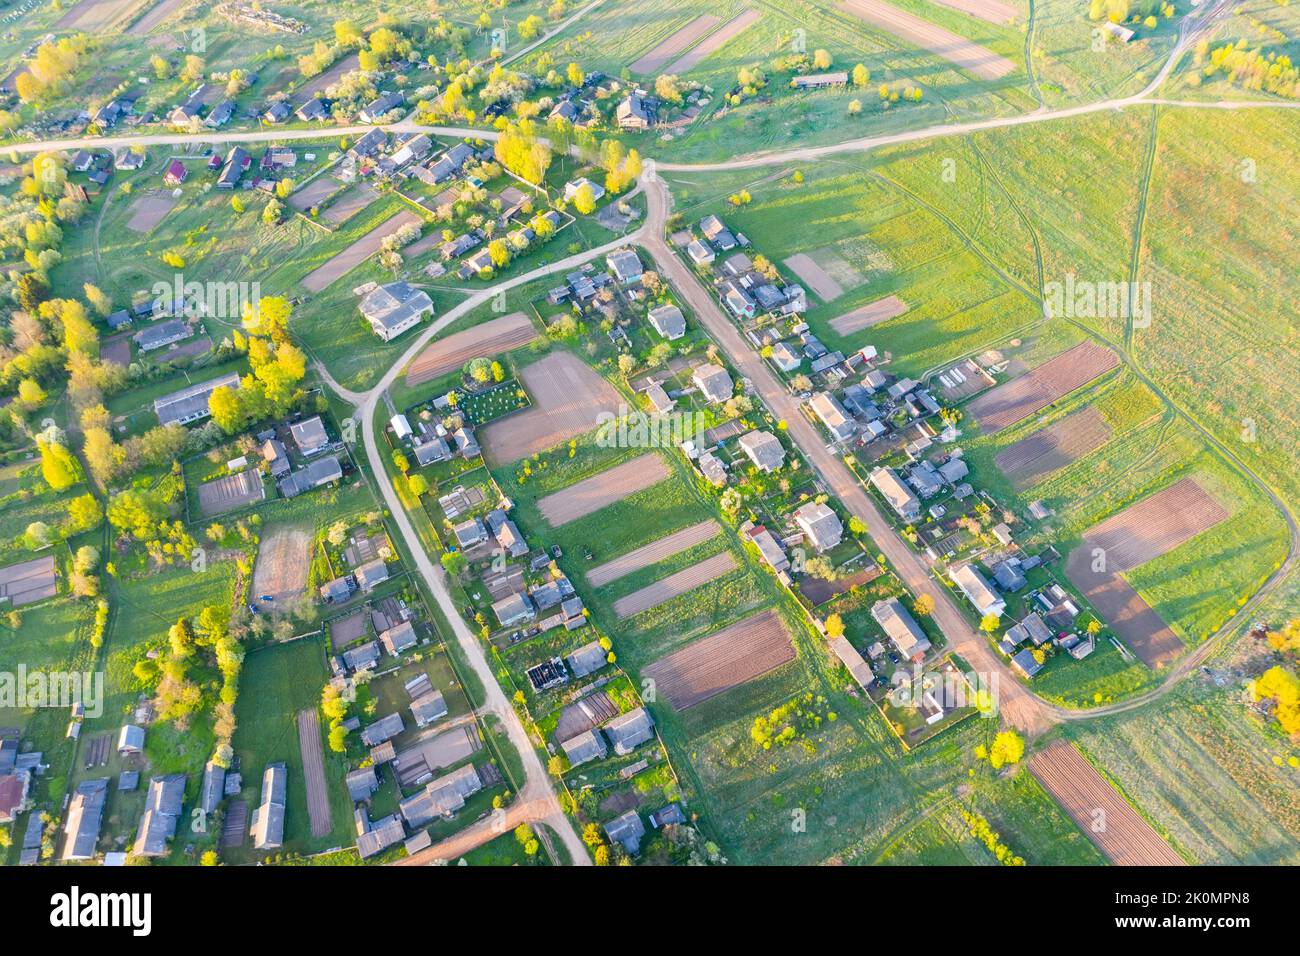 Aerial view of typical village and farm fields Stock Photo